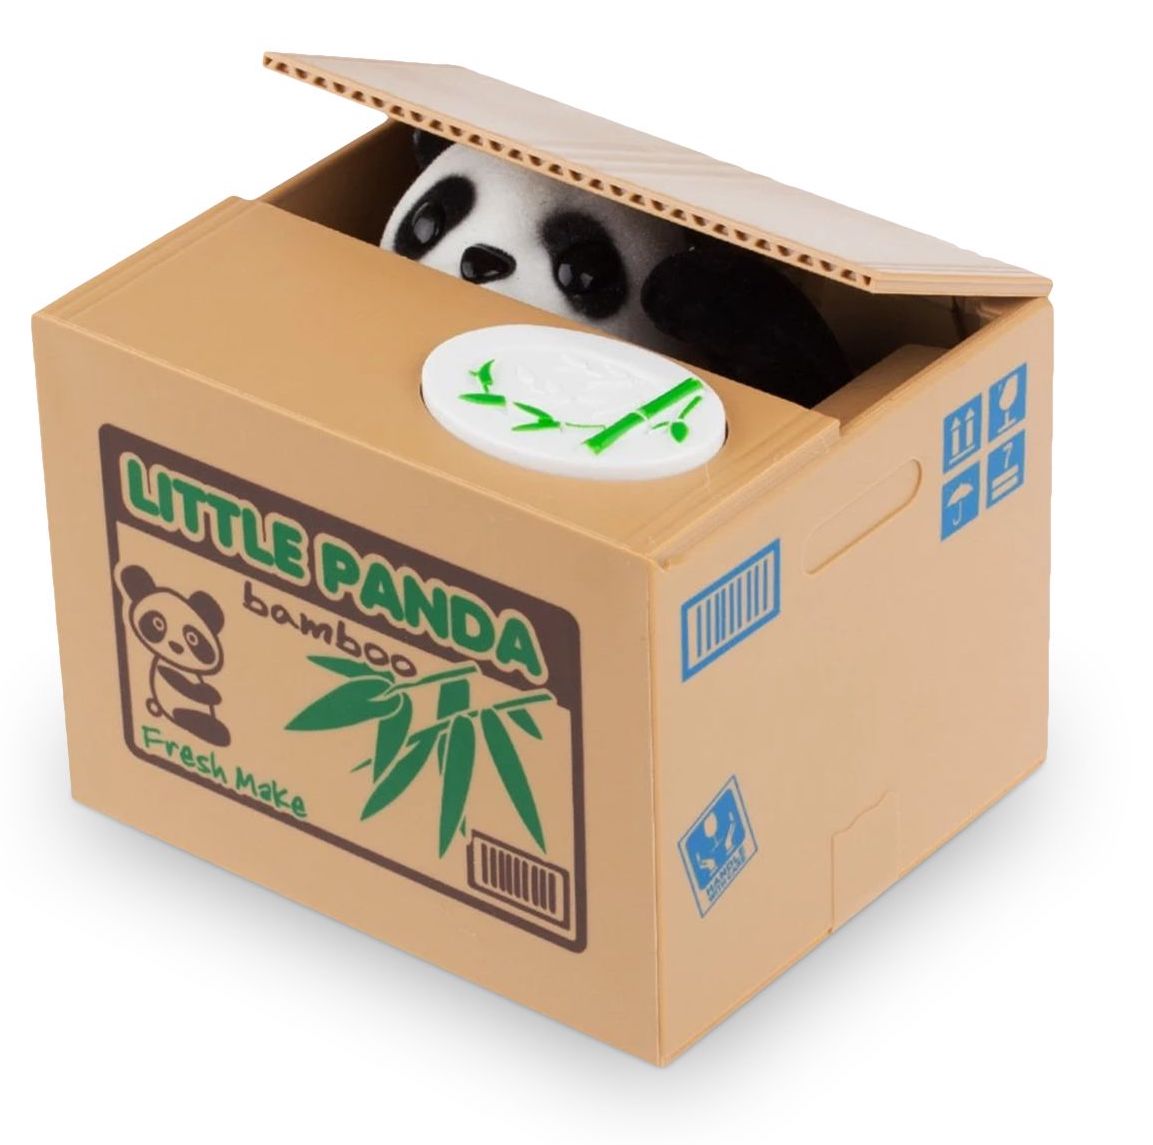 BOX for coins - an electronic cash box in the shape of a PANDA